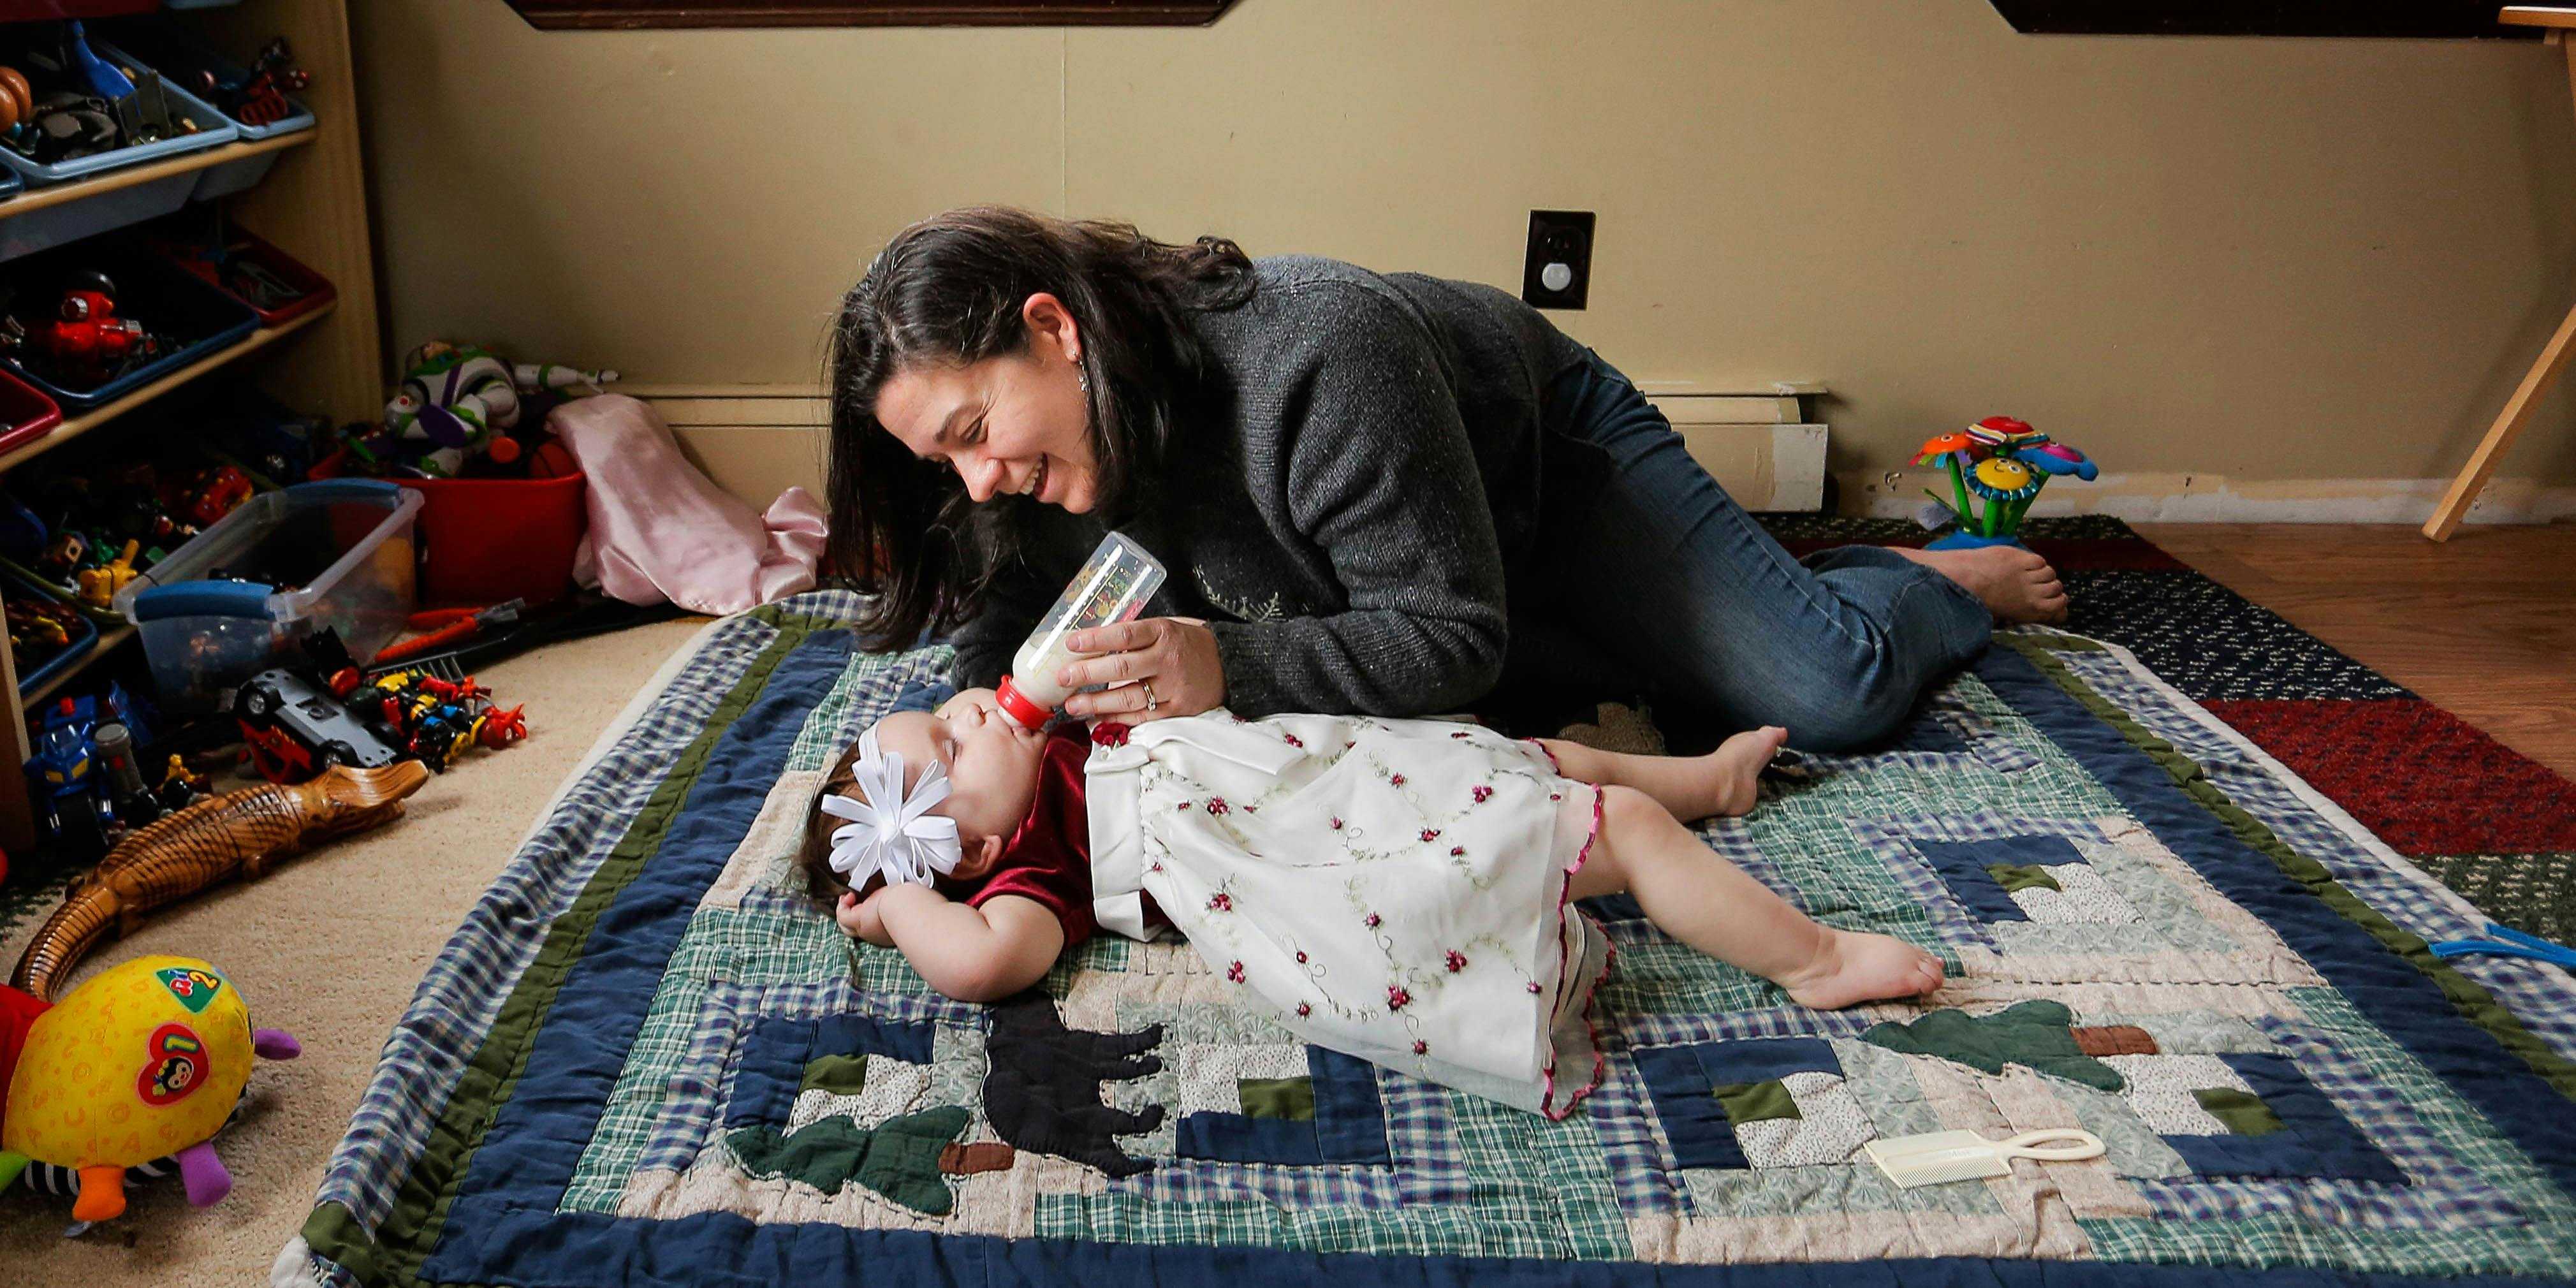 Meagan Patrick plays with her daughter, Addie, at their Acton home Wednesday, Dec. 4, 2013. Addie suffers from severe epilepsy, and research shows that medical marijuana can help cut down on the number of seizures the children have. Patrick is so desperate to try it for Addie, she is flying to Colorado later this month - a state that is at the forefront of research for pediatric uses of medicinal marijuana - to establish legal residency there. (Photo by Gabe Souza/Portland Press Herald via Getty Images)